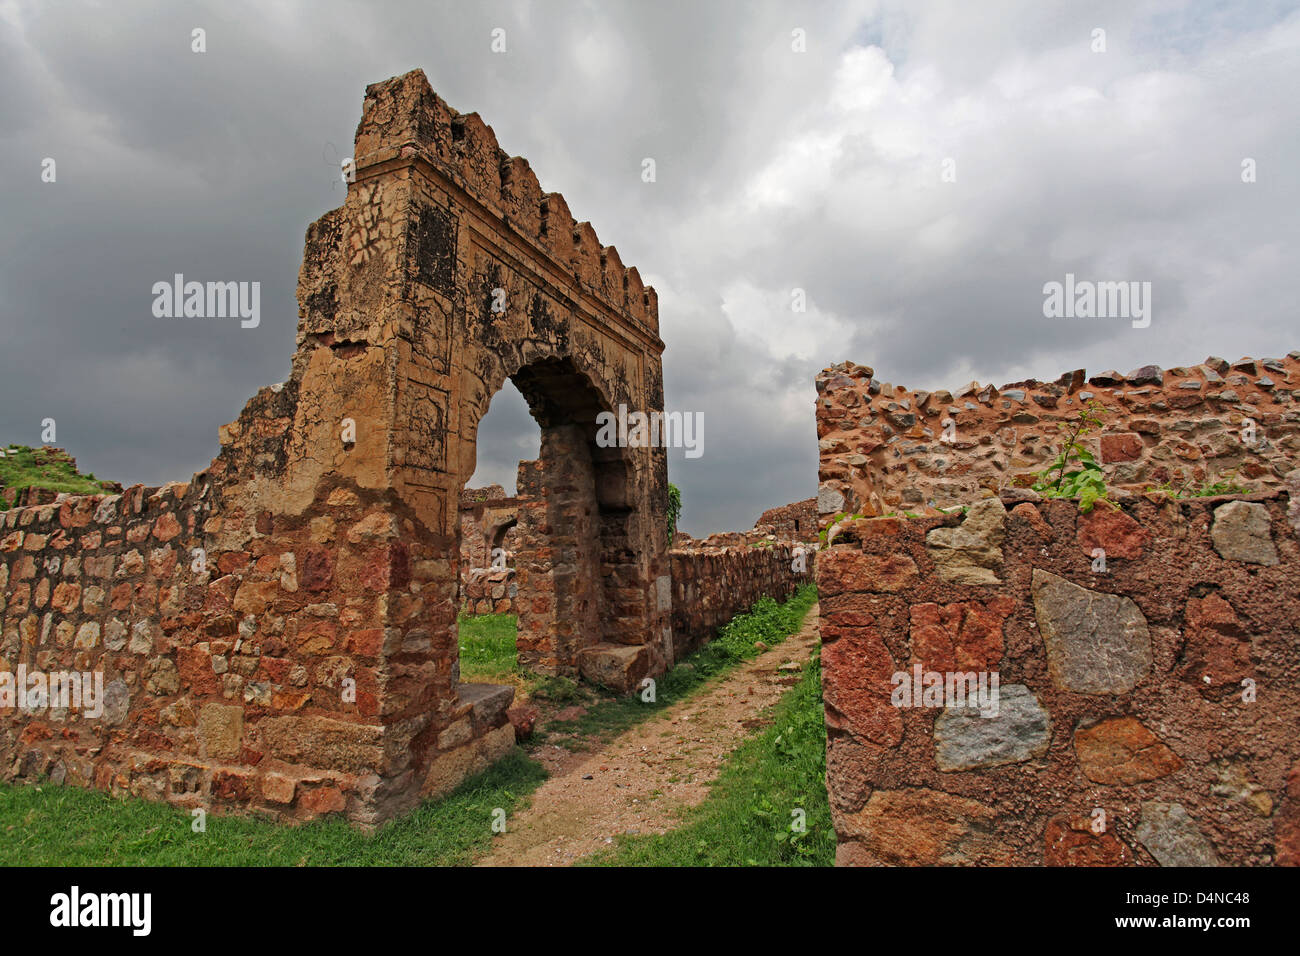 Tughlaqabad Fort is a ruined fort in Delhi, built by Ghiyas-ud-din Tughlaq, the founder of Tughlaq dynasty, in 1321 Stock Photo